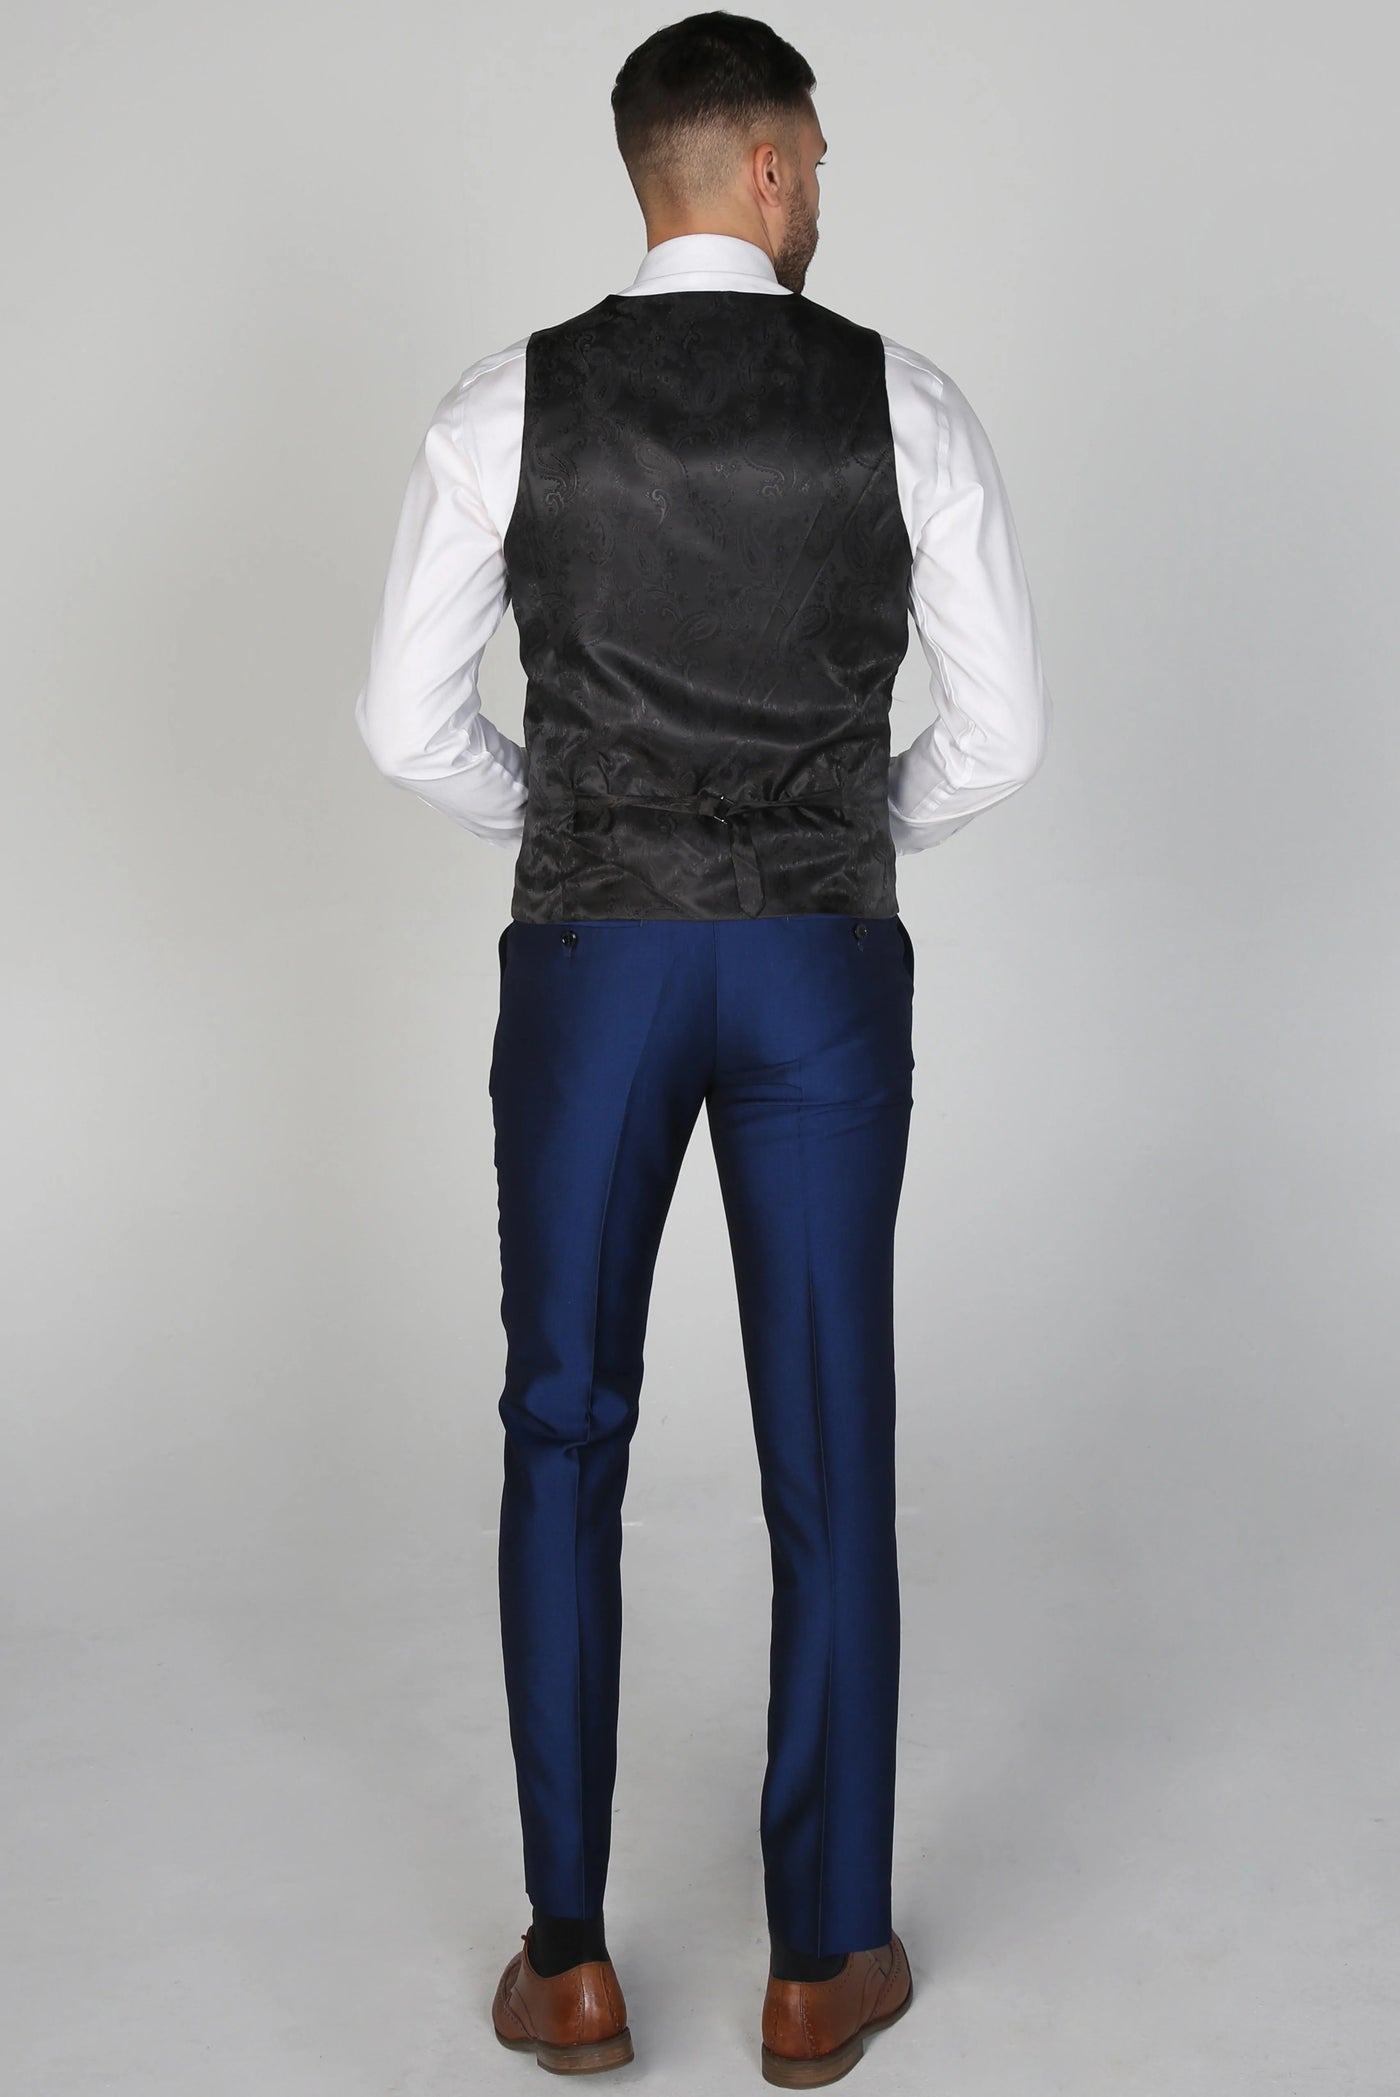 Paul Andrew KINGSLEY - Blue Three Piece Suit